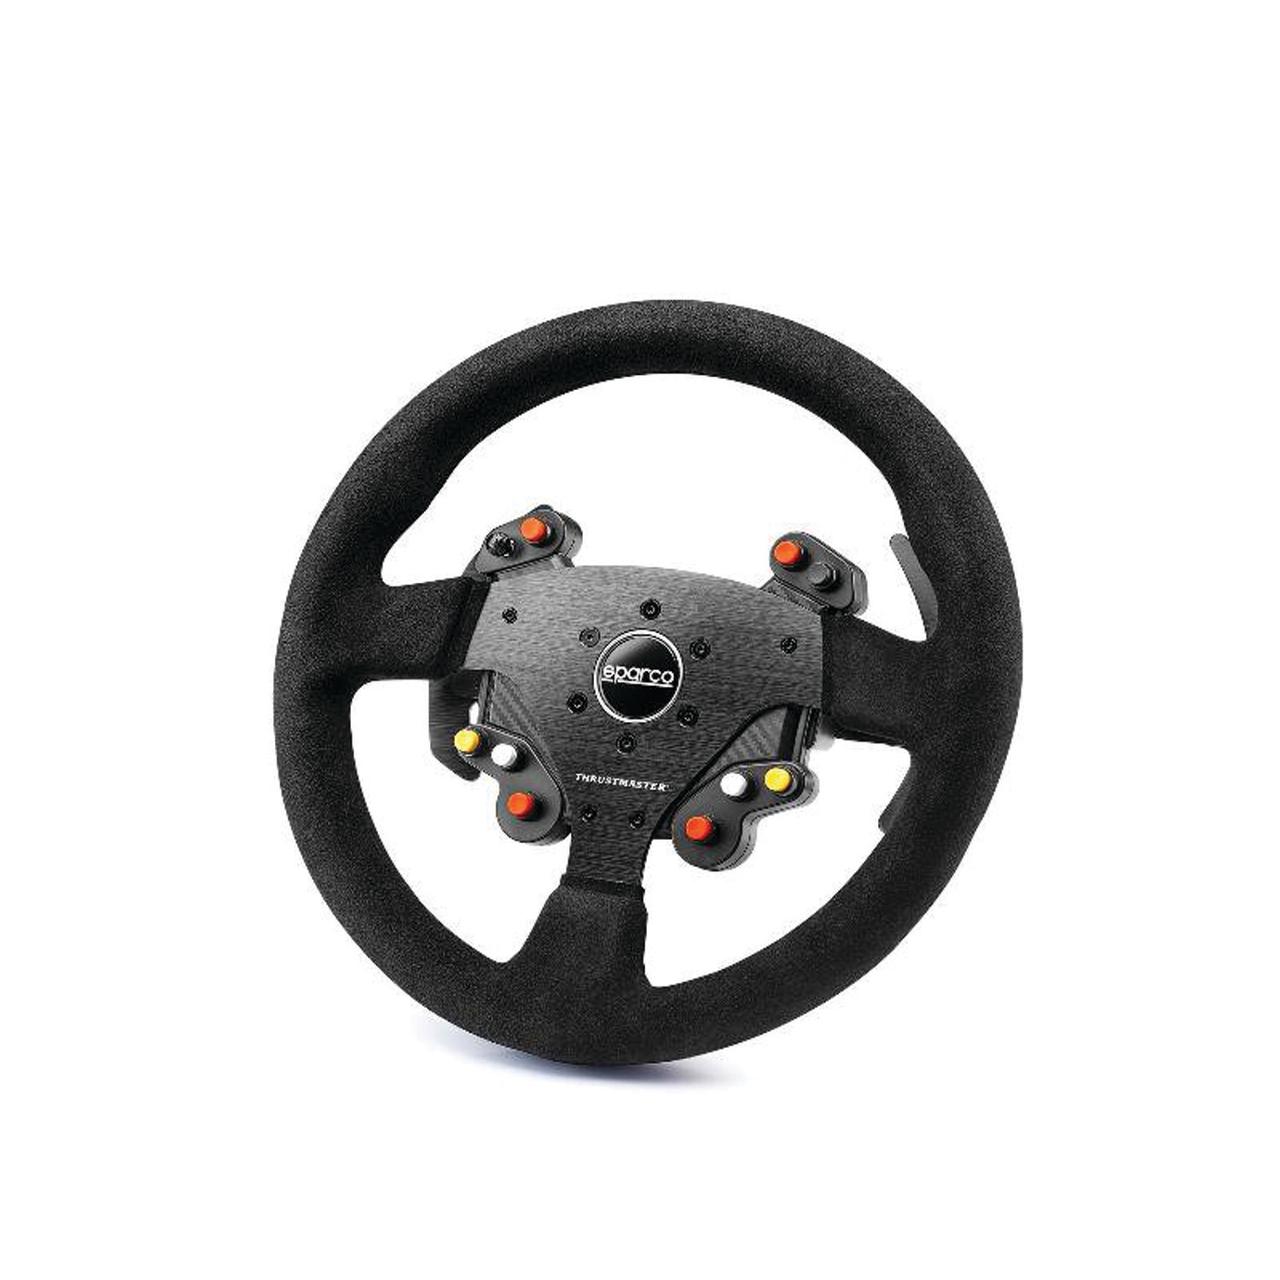 Thrustmaster R 383 Sparco Wheel for PS4, PS5, Xbox One, Series X/S, and PC - image 2 of 5